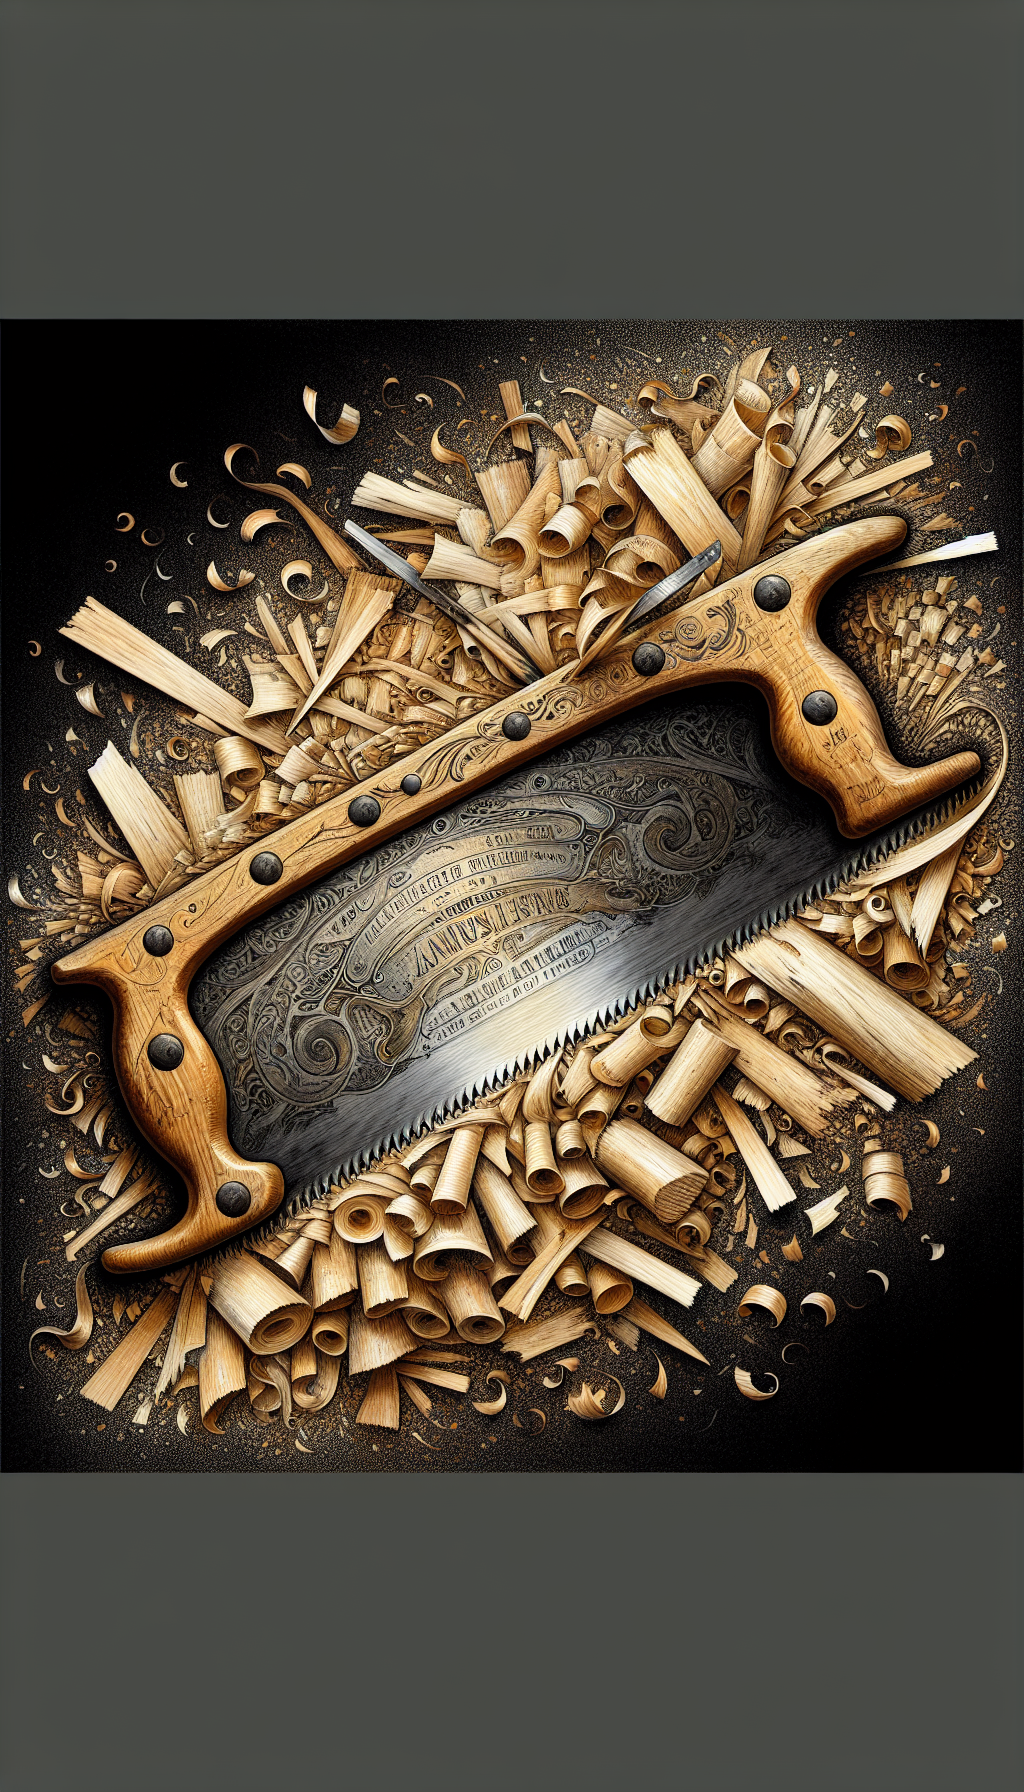 An intricate old crosscut saw blade, half-covered in shavings, reveals elegant engraved signatures amidst rust and patina. Diverse artistic styles—like photorealism for the saw, abstract shapes for the wood, and pointillism for the signatures—symbolize the unique flair of each maker's mark, illustrating the detective work involved in tracing the origins of antique tools.